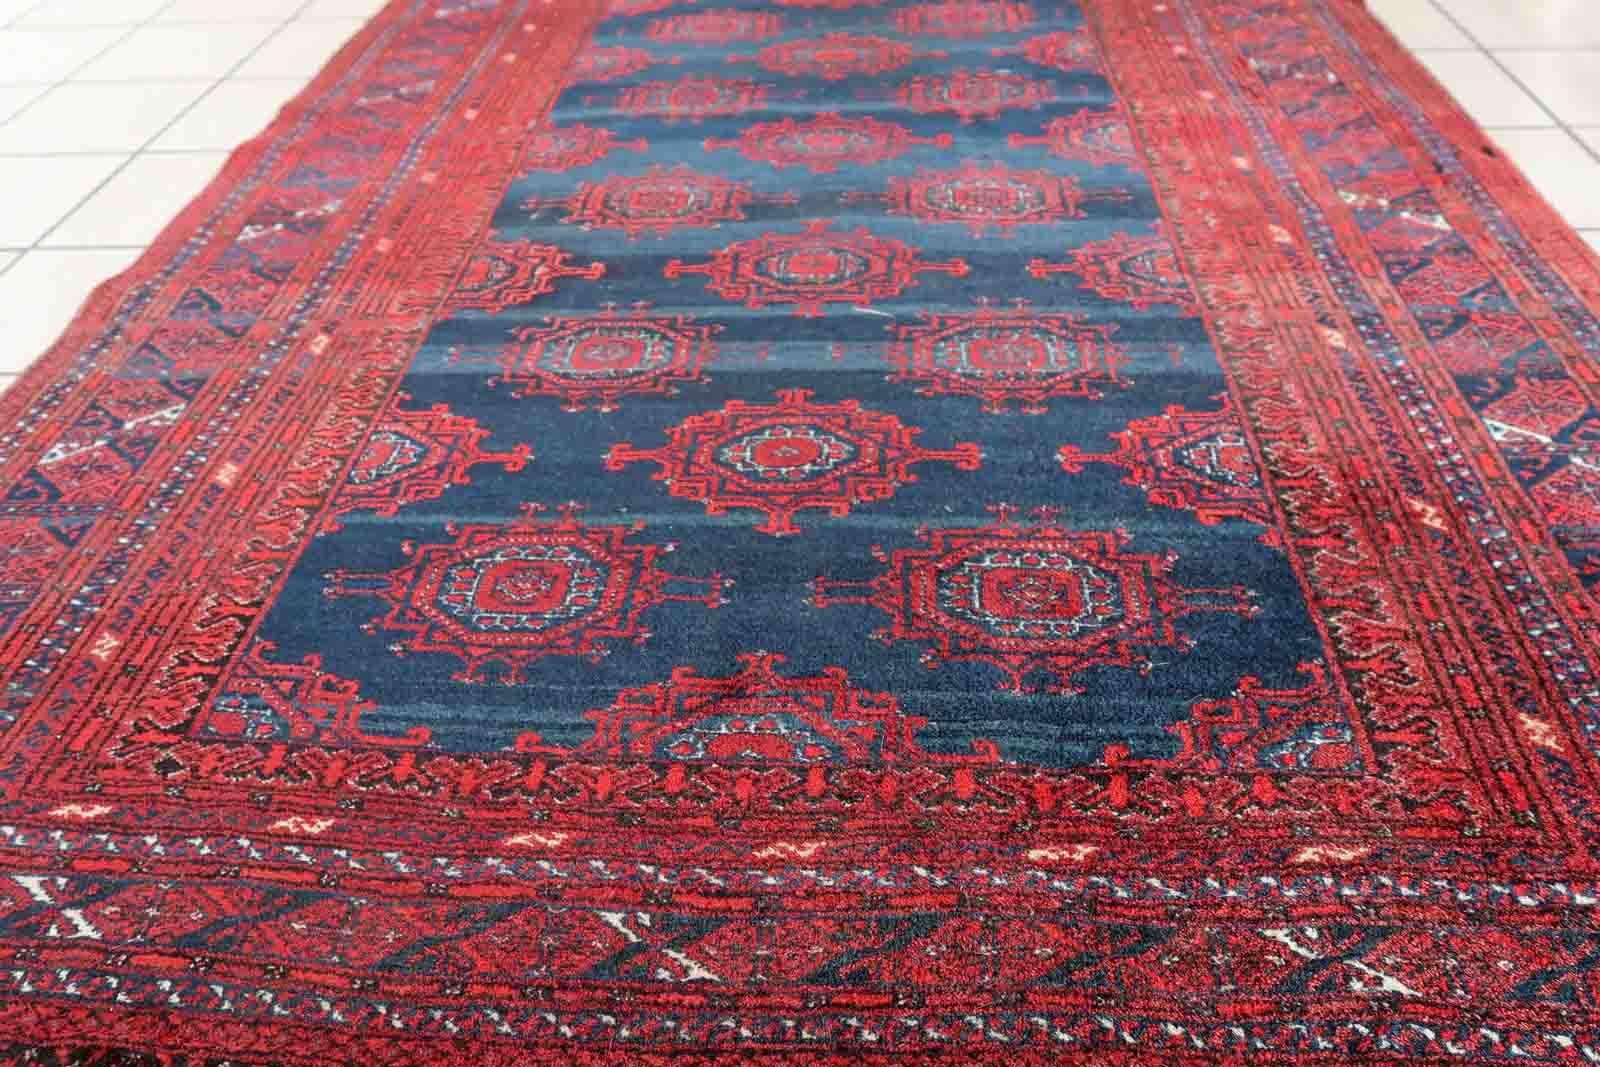 Handmade vintage Afghan Baluch rug in bright red and dark blue shades. The rug is from the middle of 20th century in original good condition.

-condition: original good,

-circa: 1950s,

-Size: 3.9' x 5.8' (120cm x 179cm),

-Material: